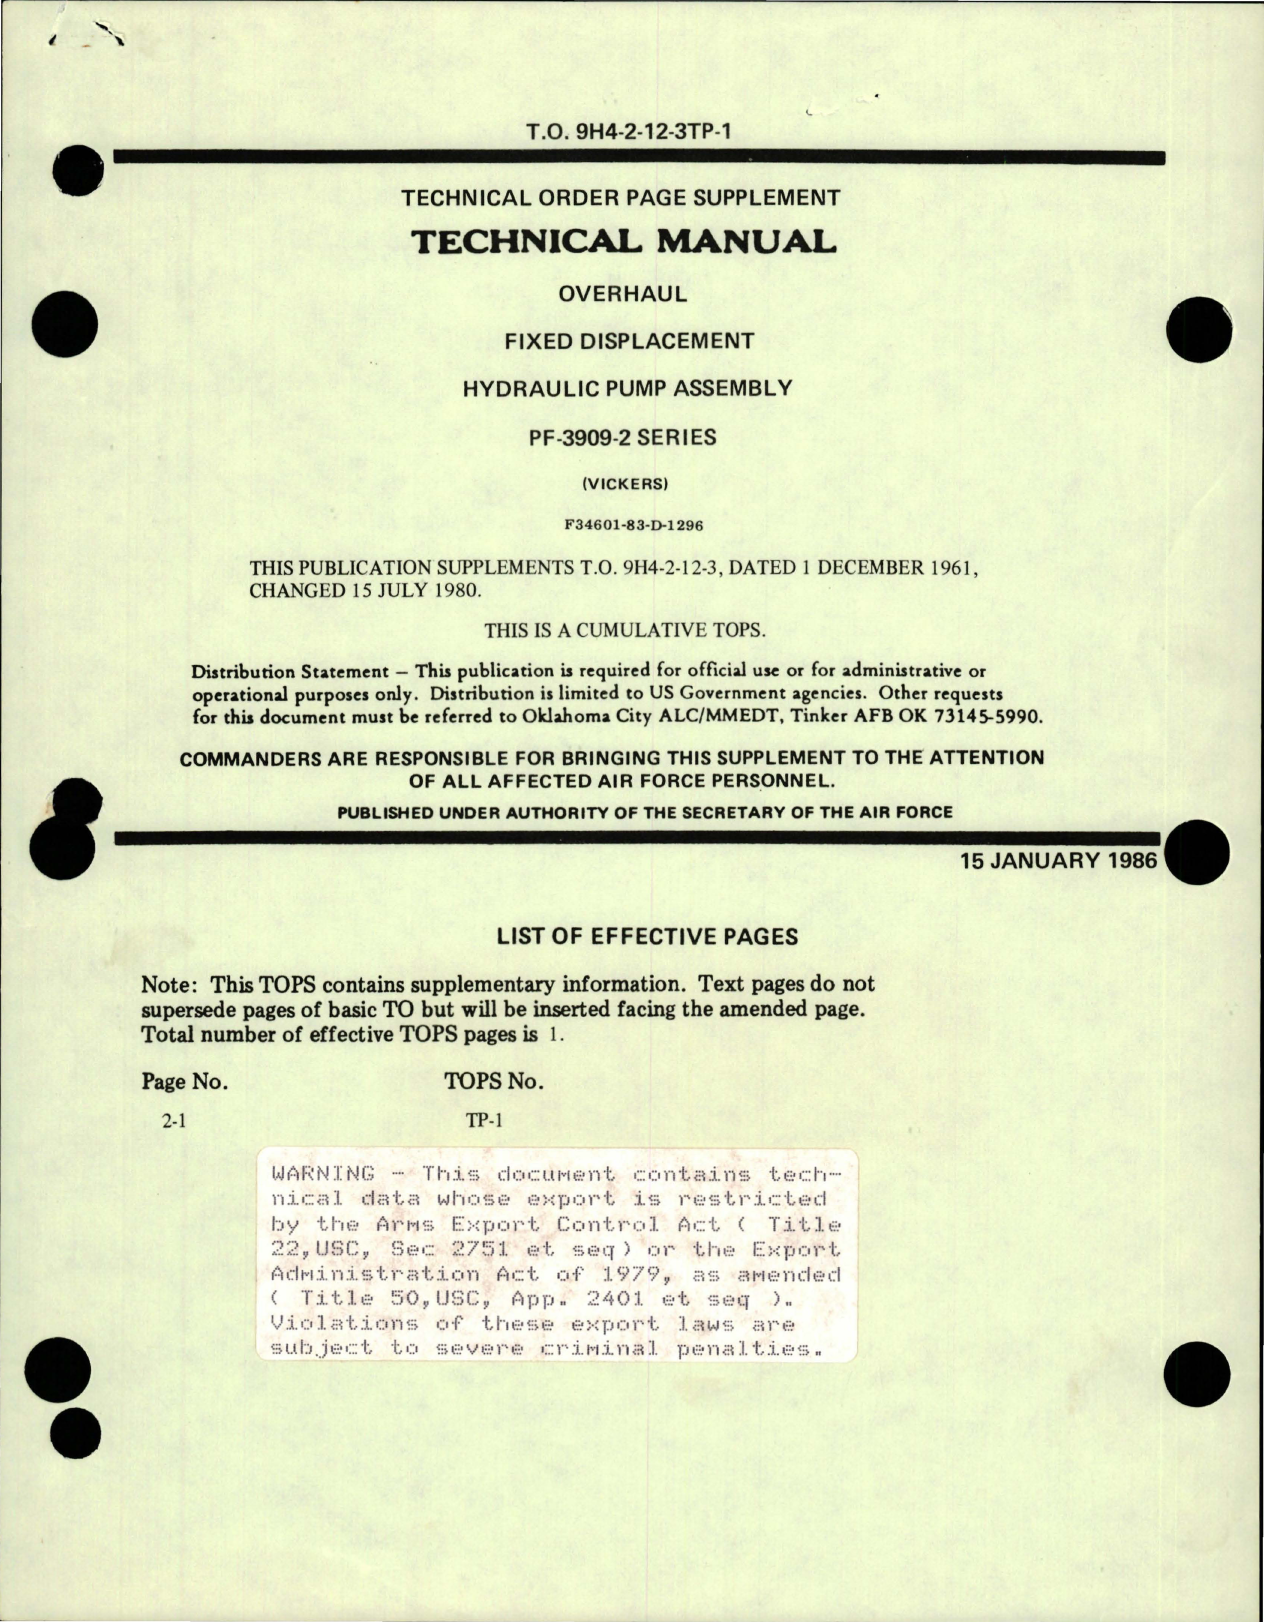 Sample page 1 from AirCorps Library document: Supplement to Overhaul Manual for Fixed Displacement Hydraulic Pump Assembly - PF-3909-2 Series